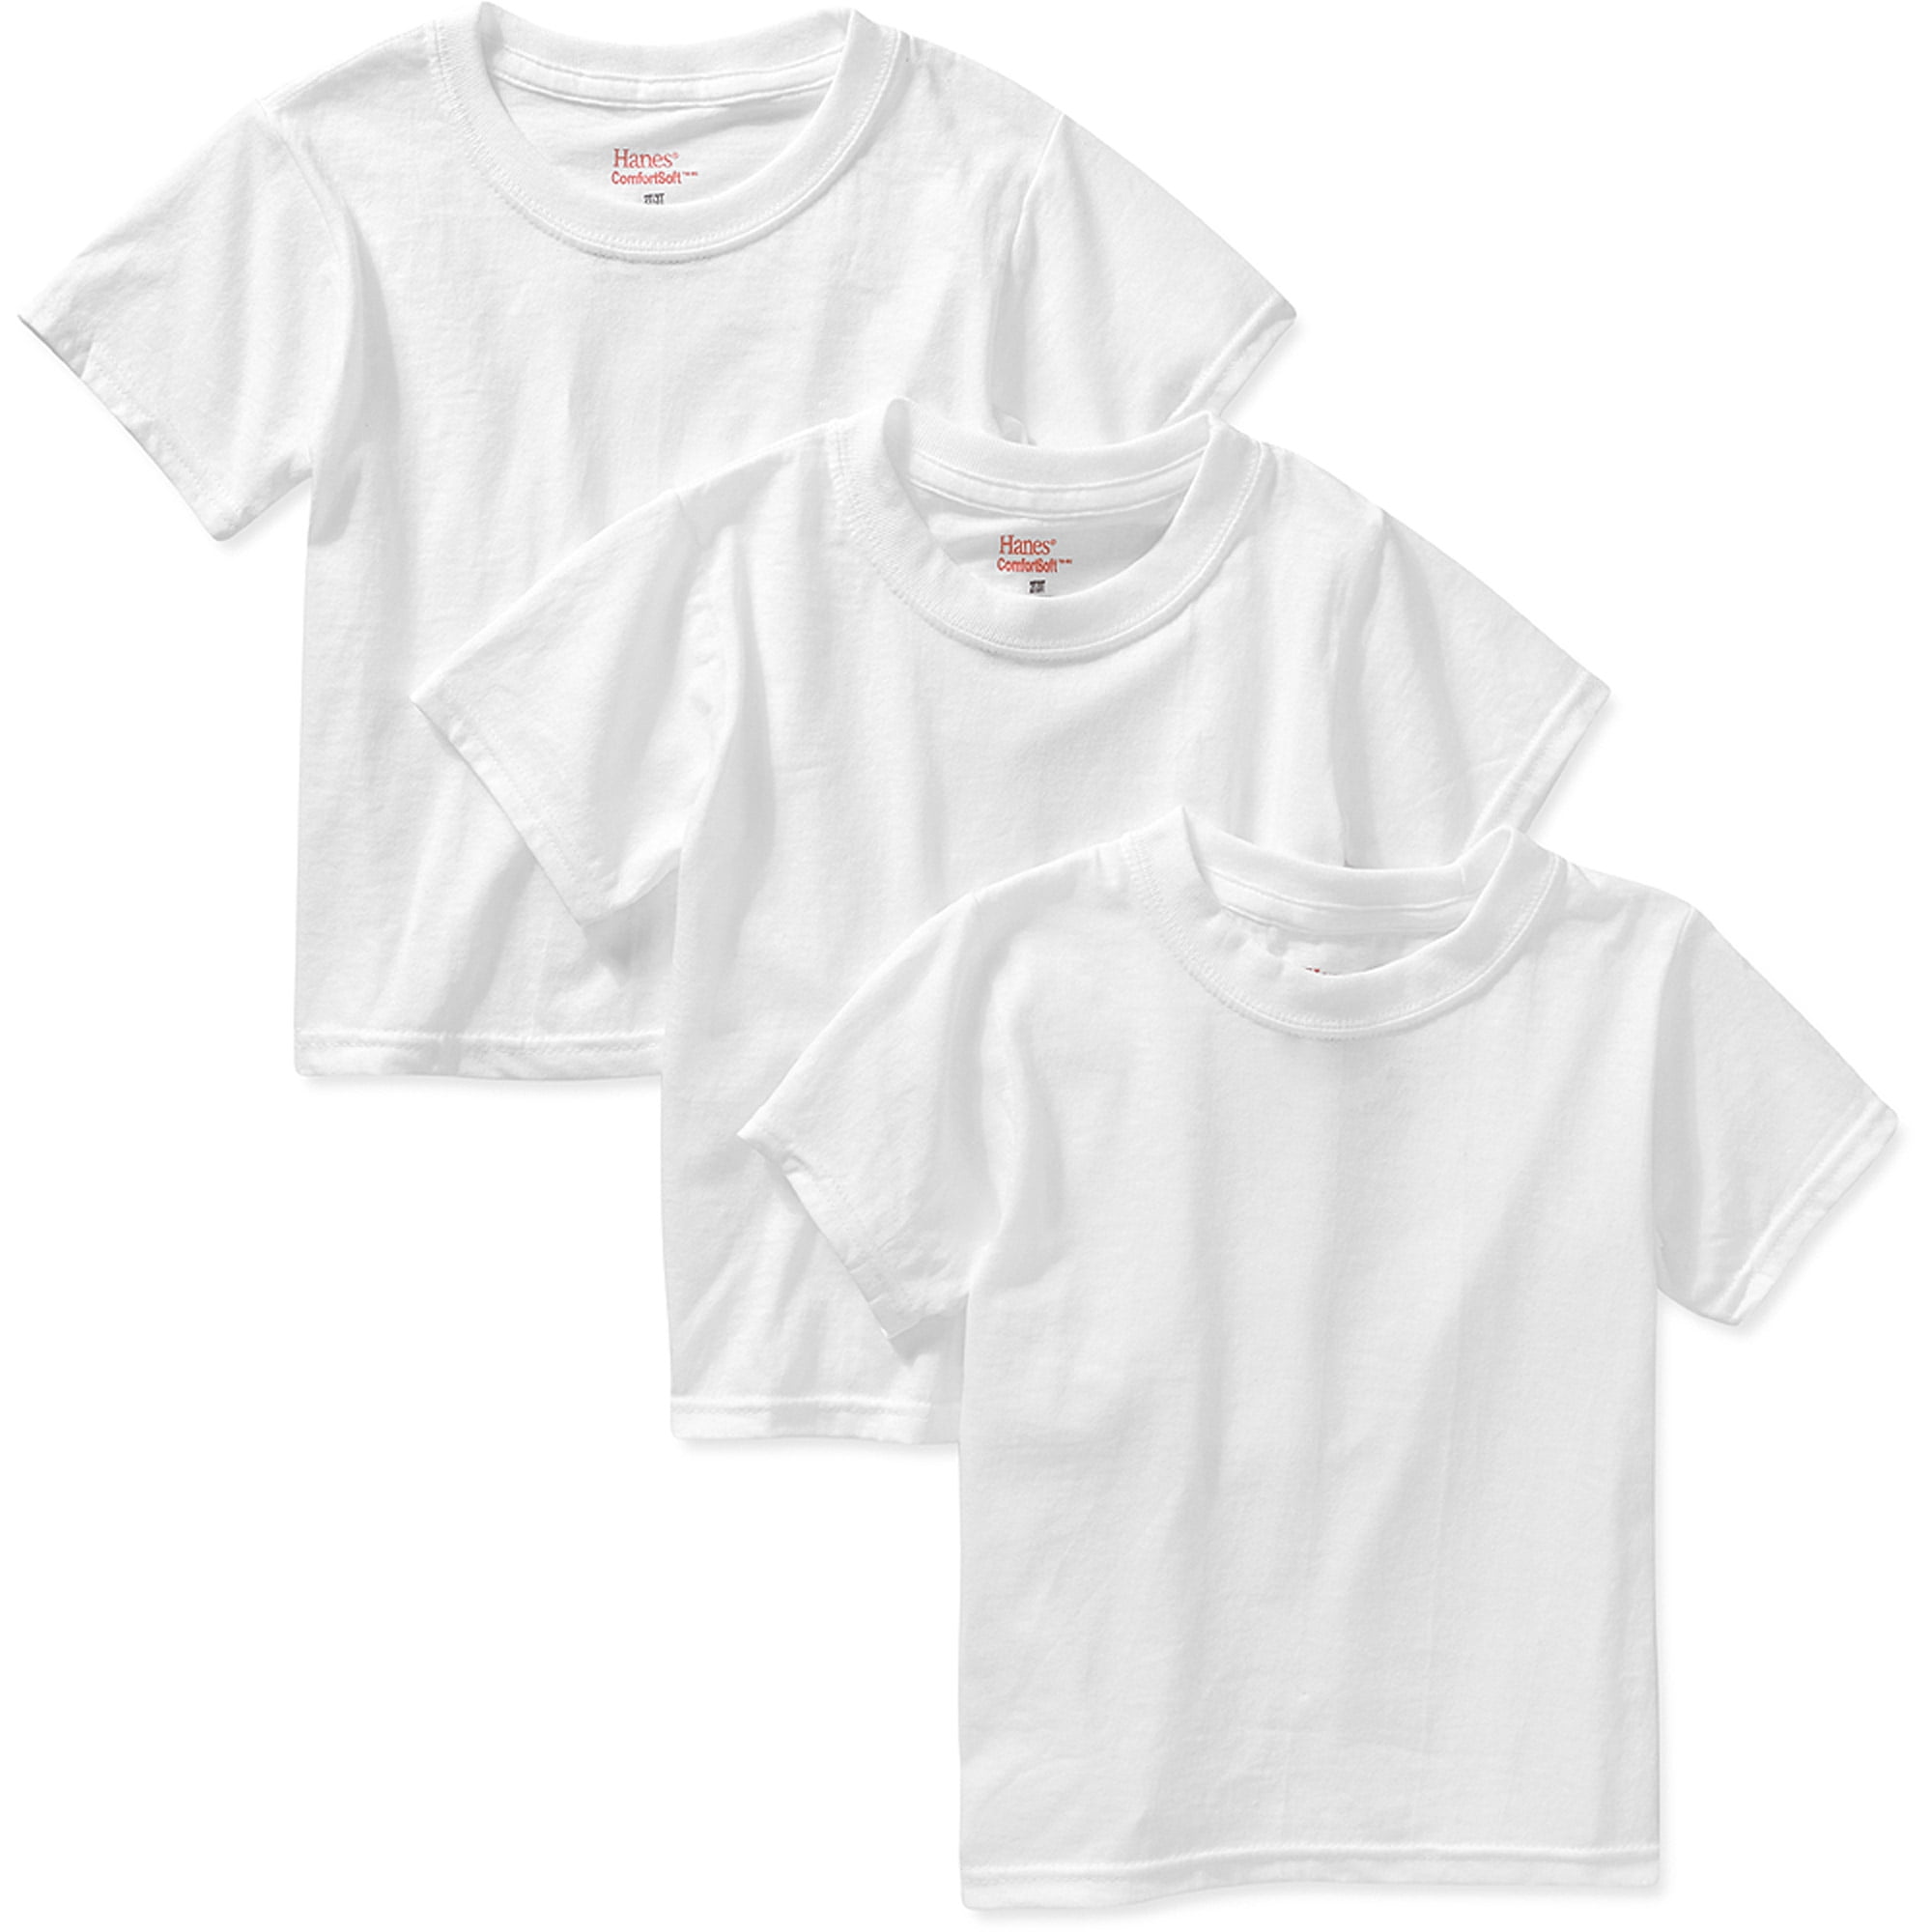 Hanes Toddler Boys Crew Undershirts 5-Pack 2T/3T-White 